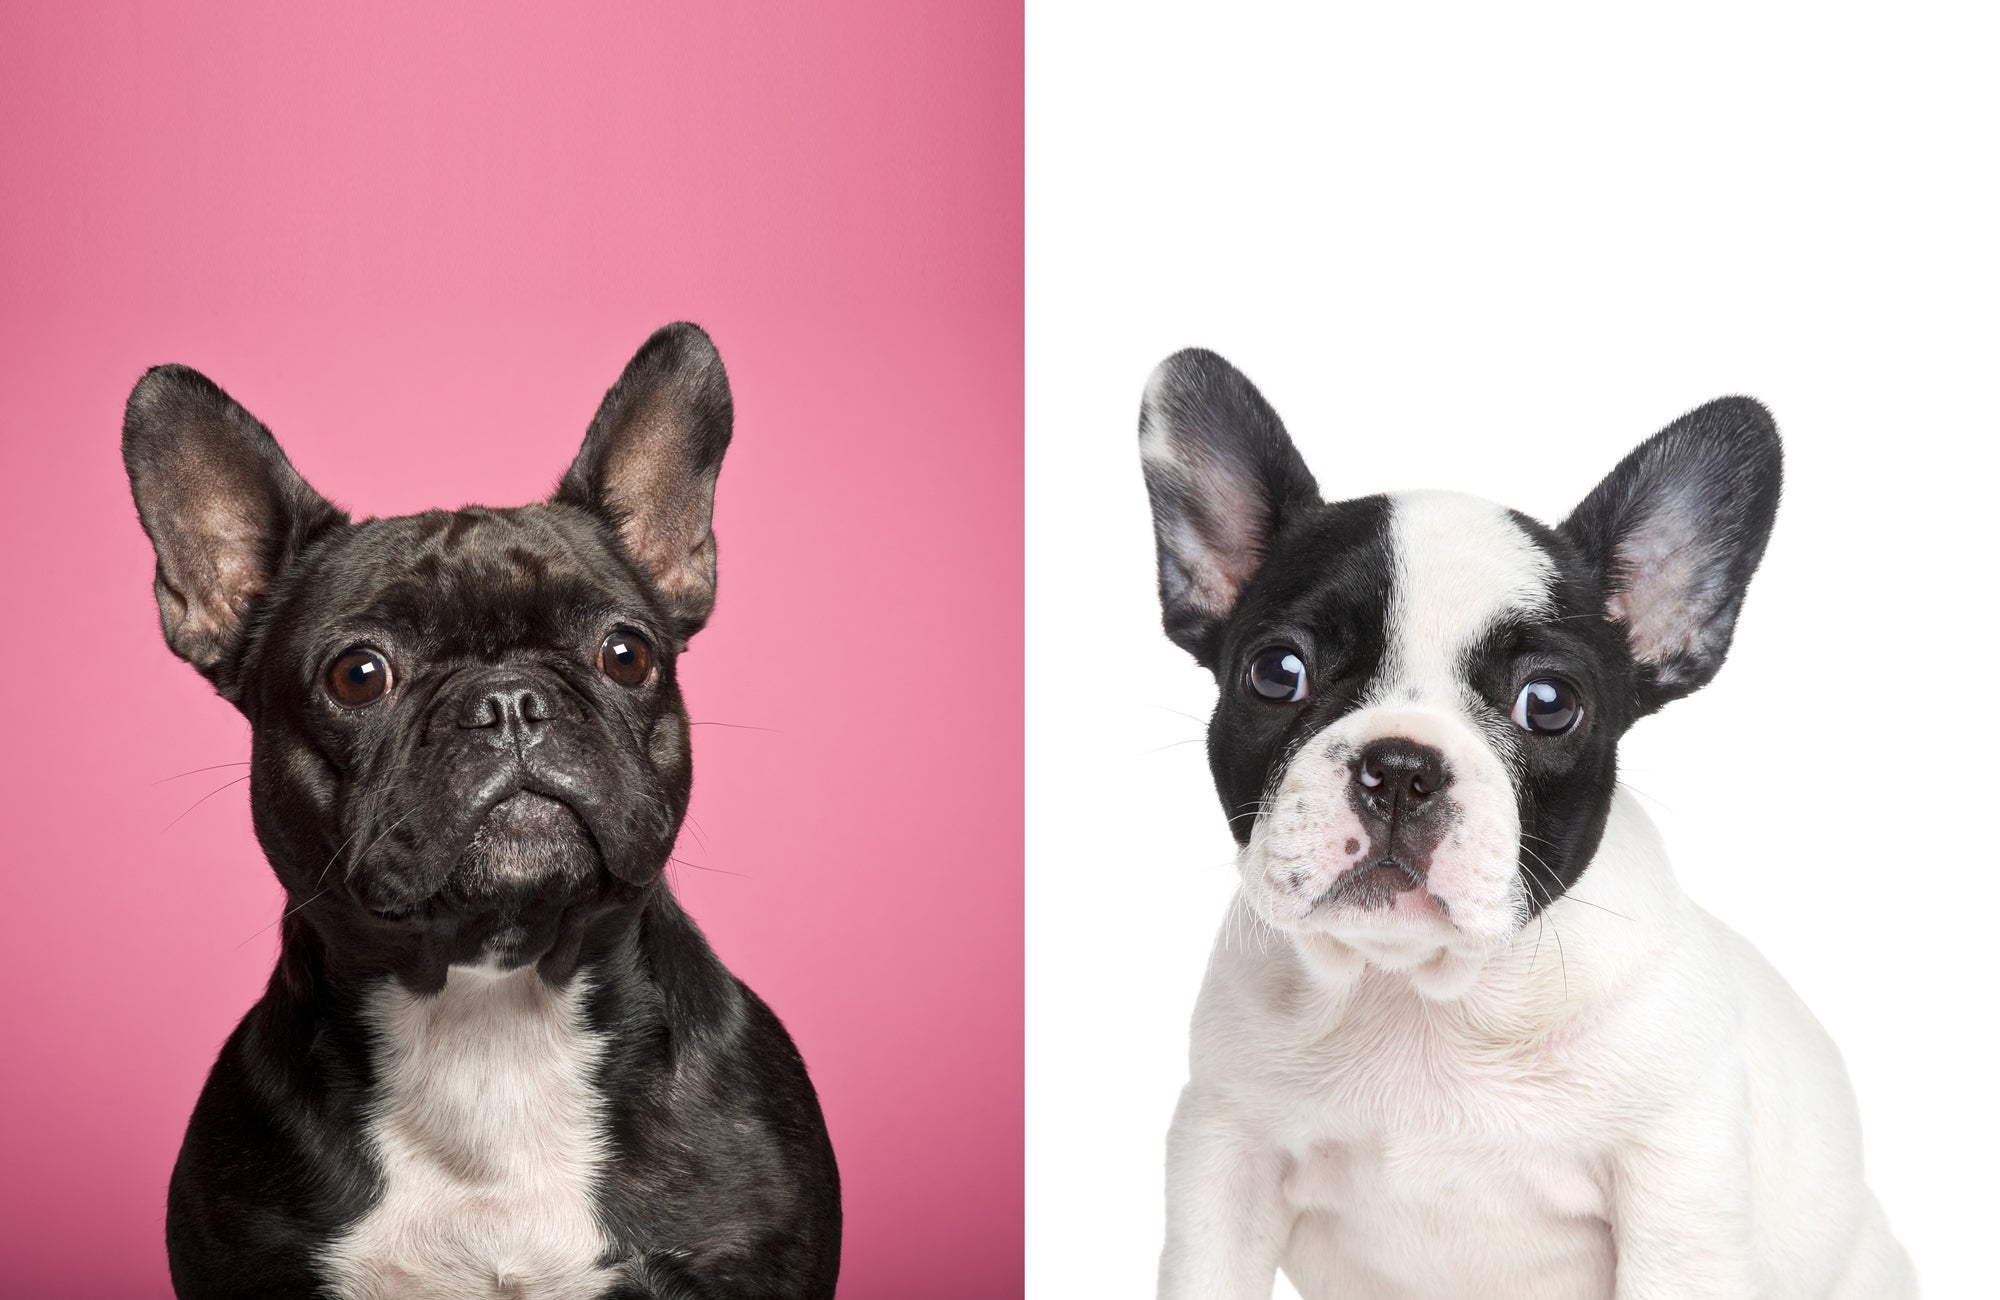 Pick A French Bulldog And Get An Oddly Specific Compliment